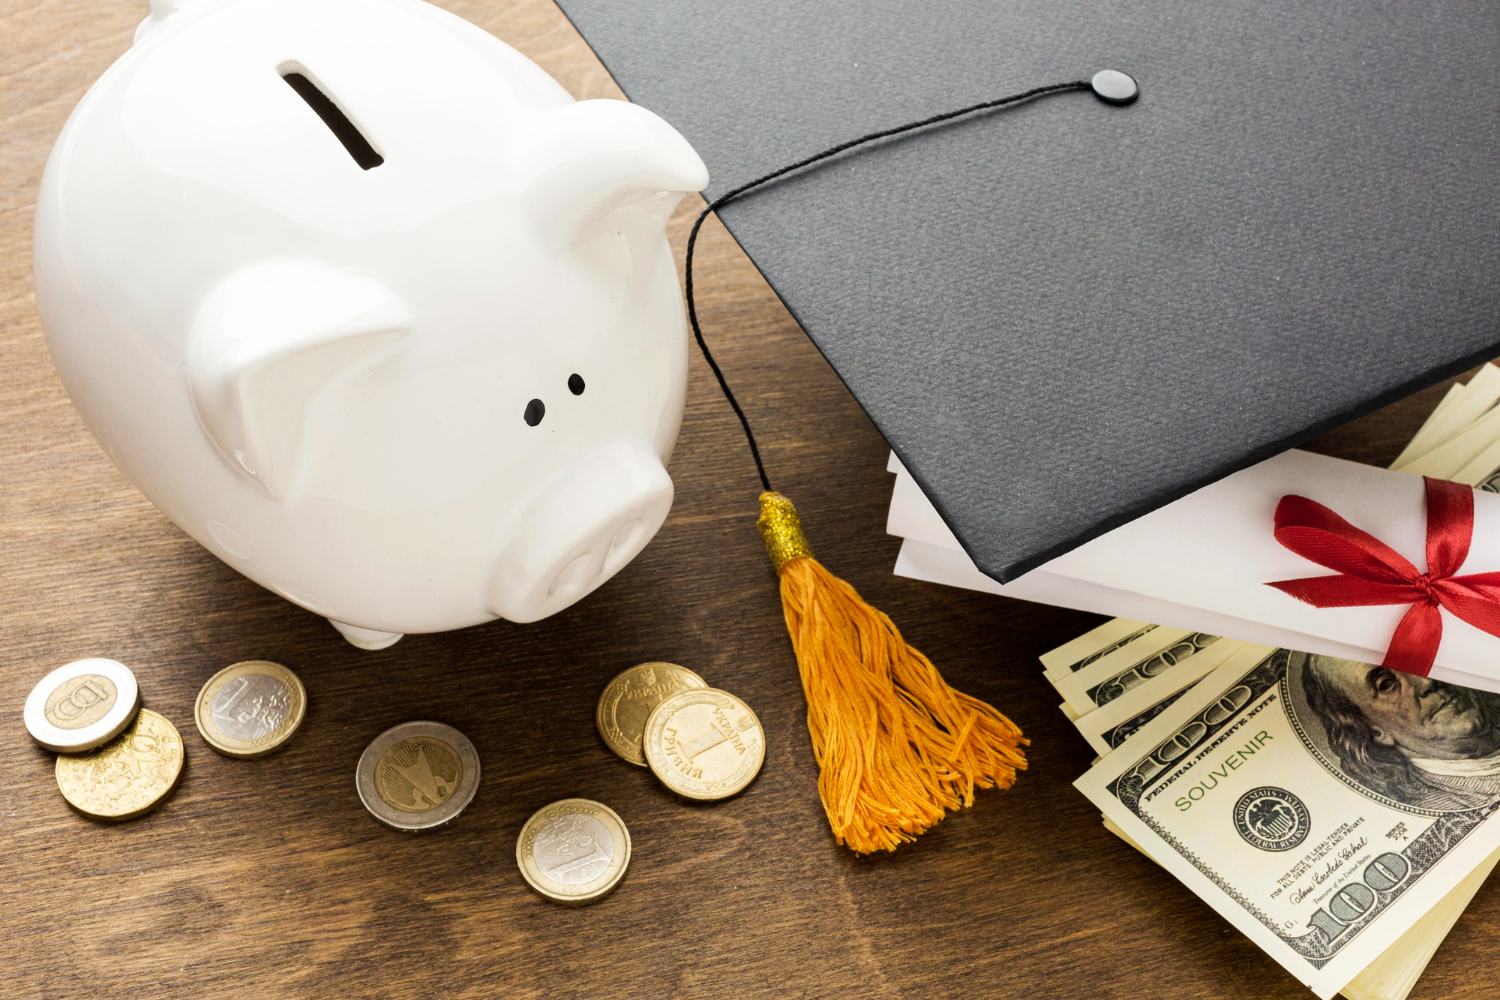 Graduate School Funding Options for International Students in the USA